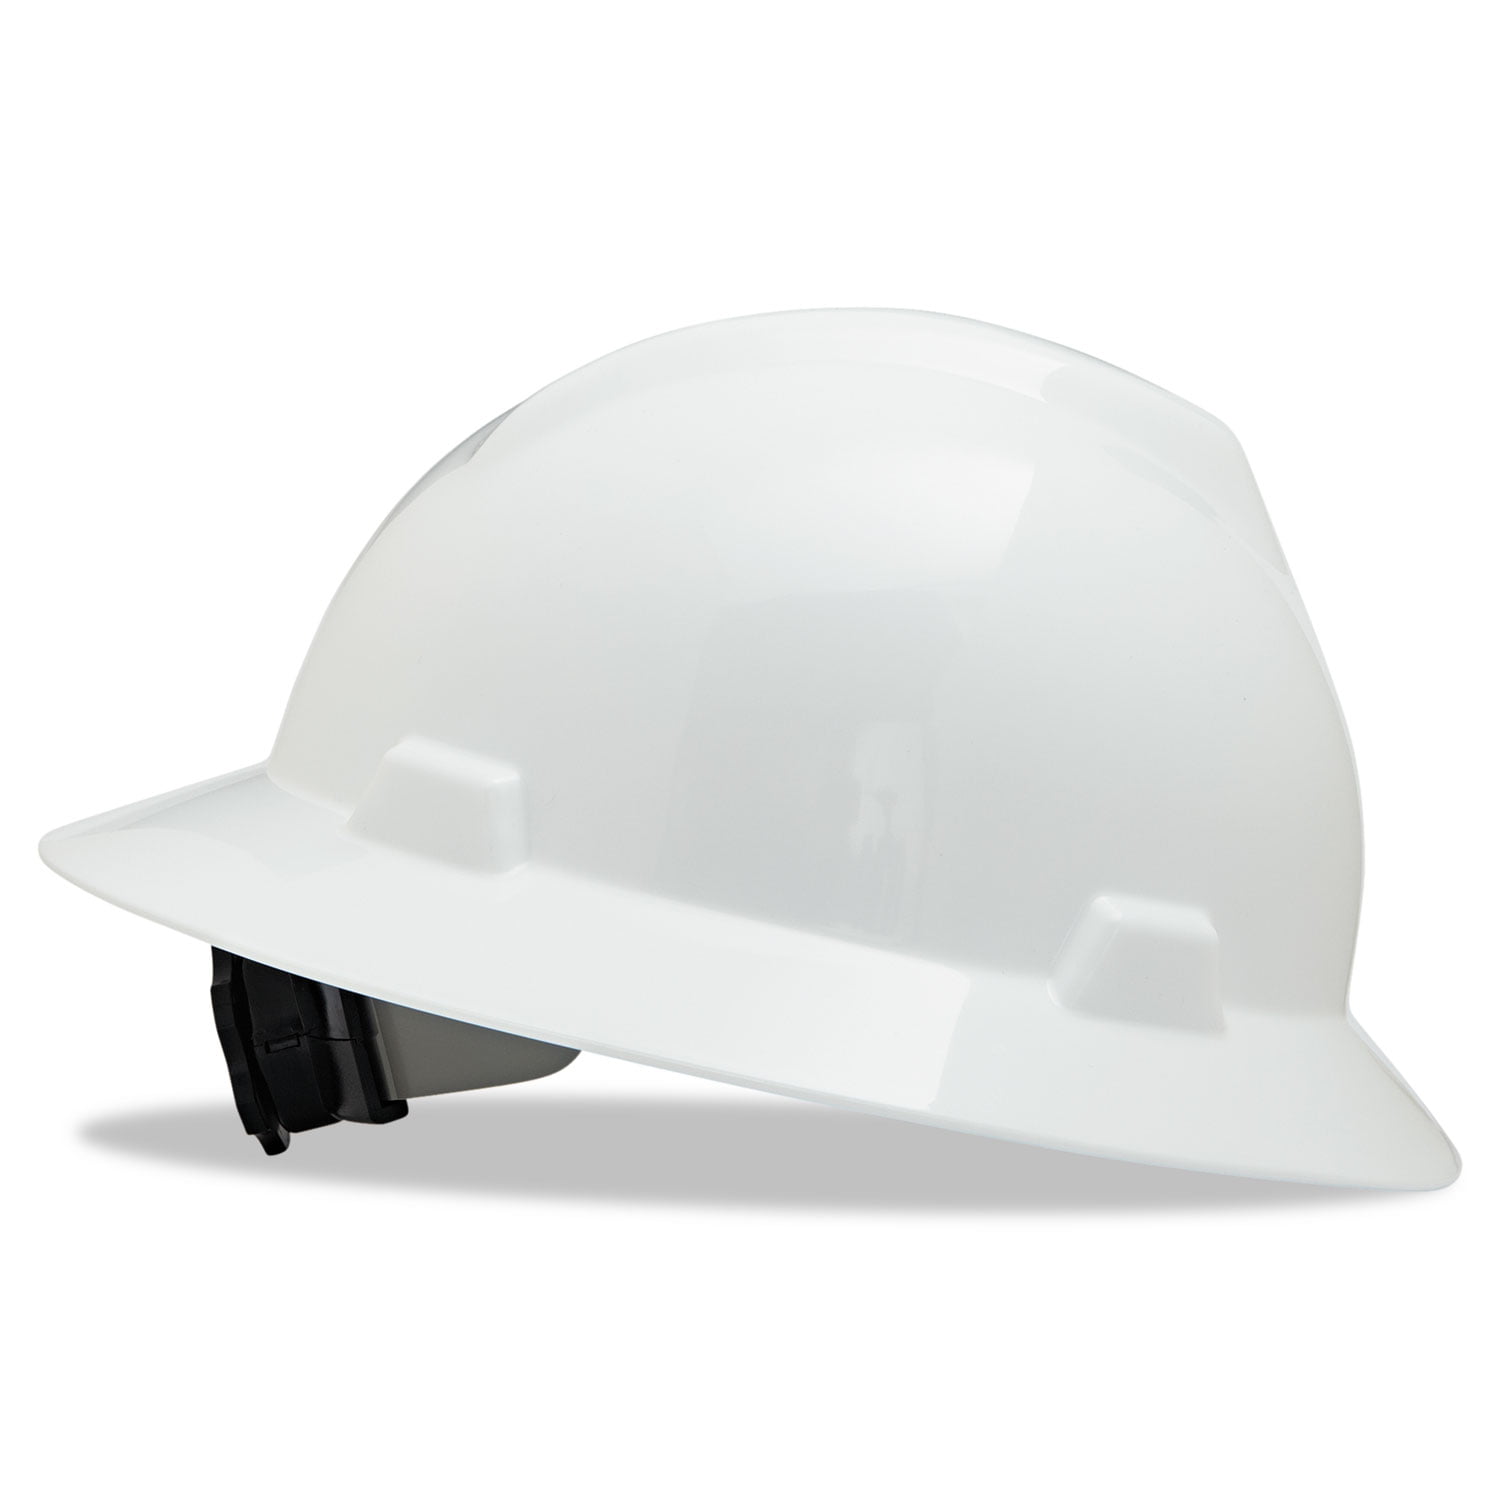 Black Color Hard Hat Chin Strap Emergency Earthquake Construction Safety 